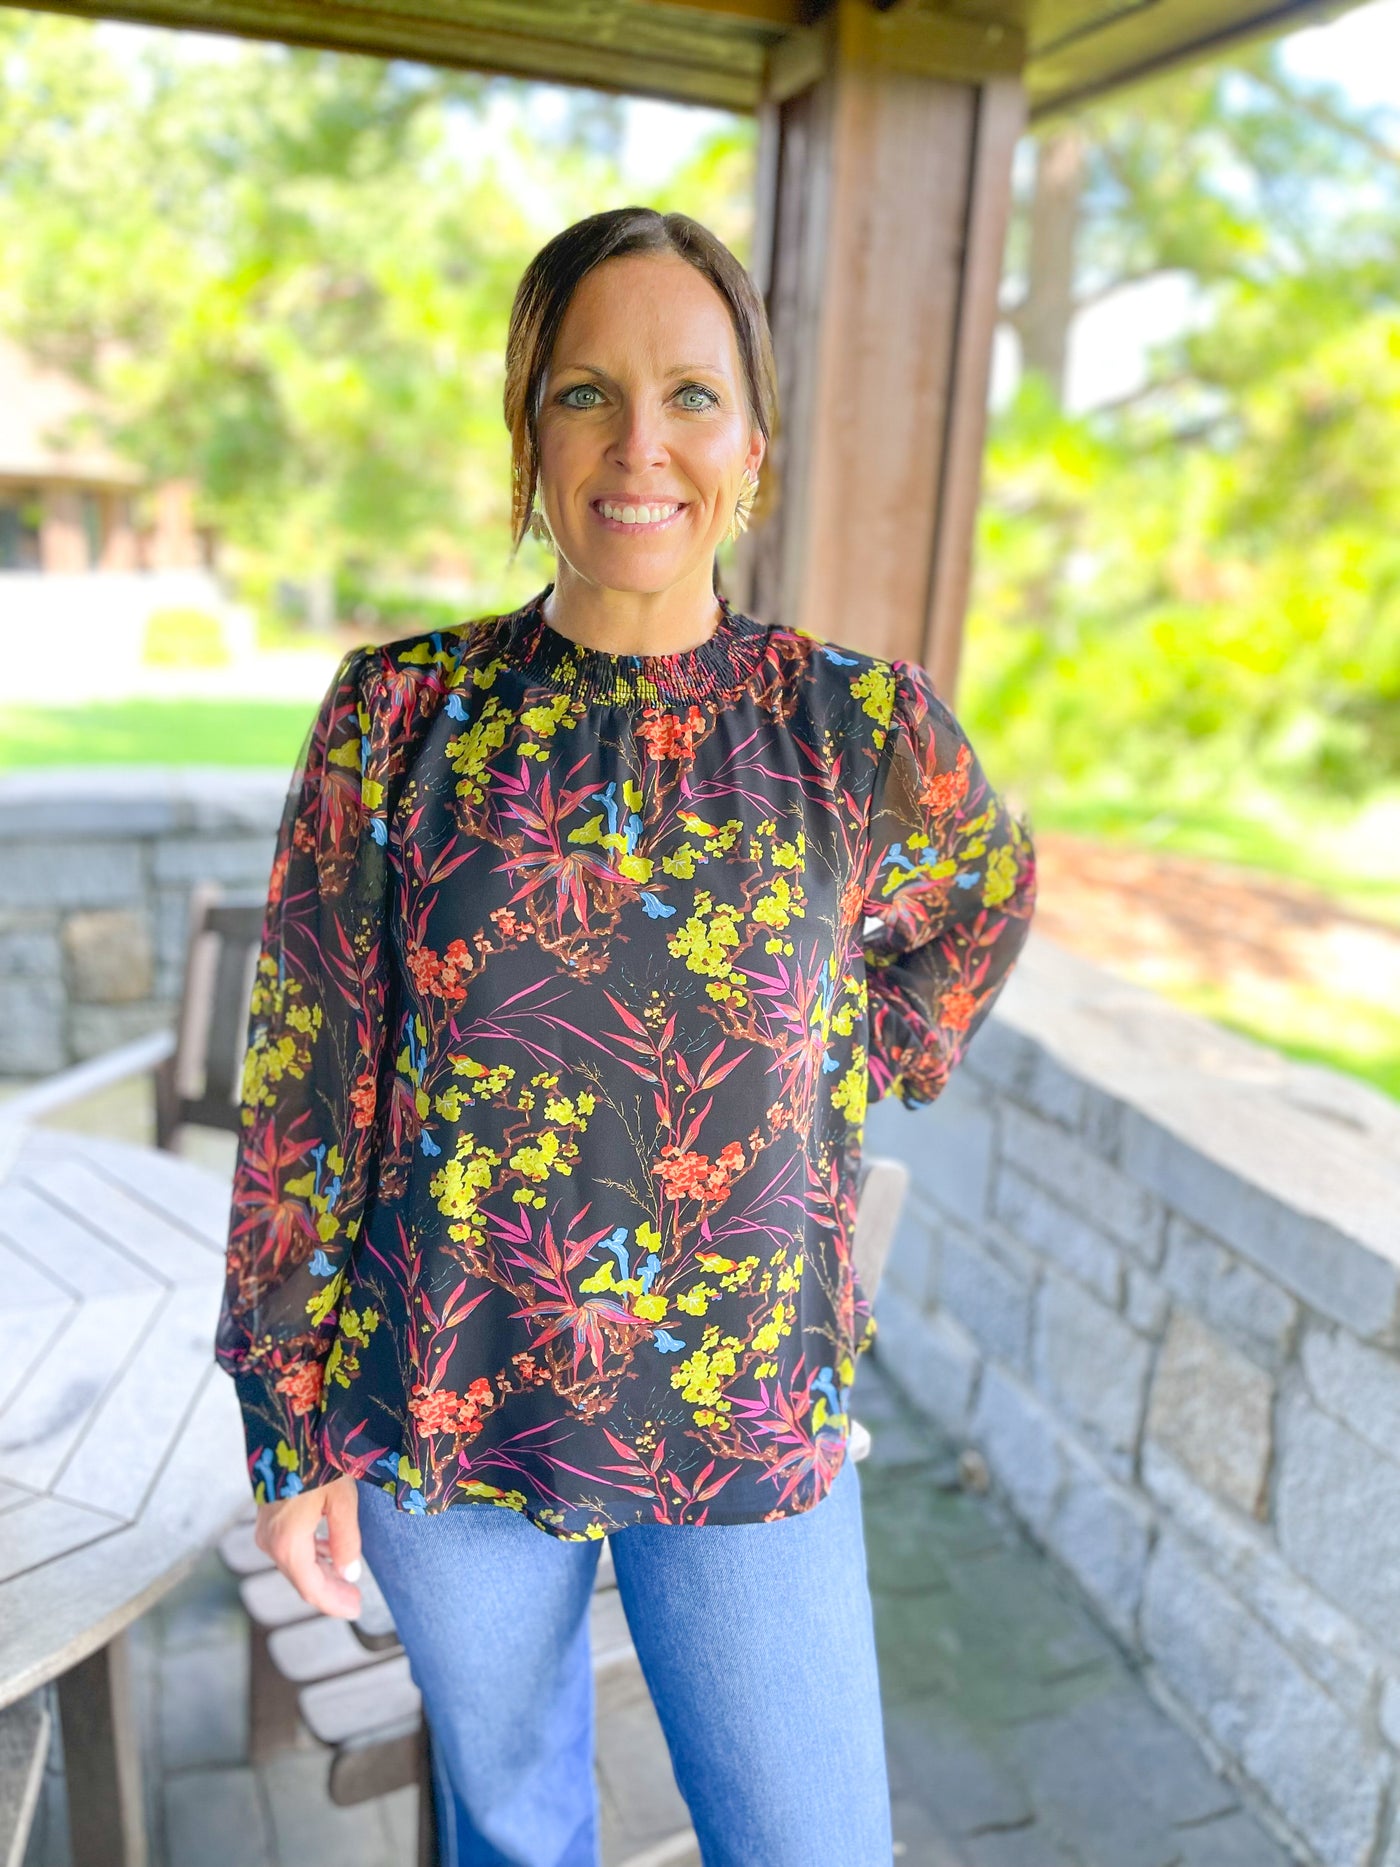 Hold On My Heart Black Floral Smock Trim Top